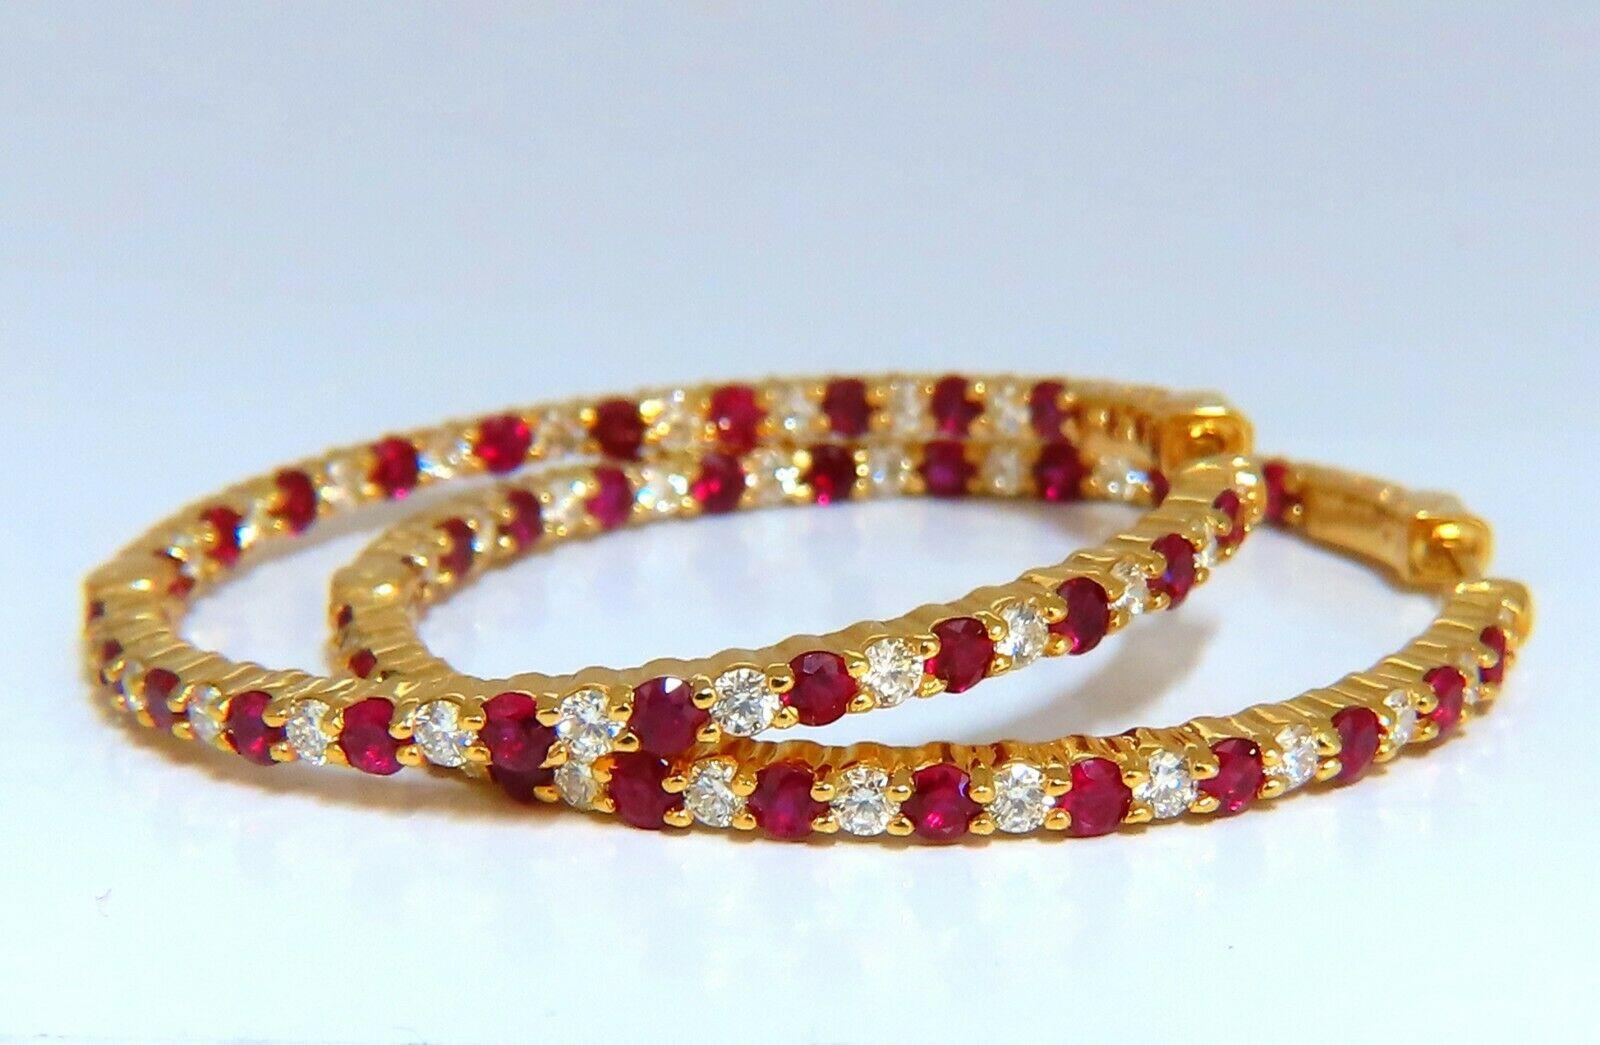 5.08ct Natural Ruby Diamonds Hoop Earrings 14kt Rose Gold Inside Out In New Condition For Sale In New York, NY